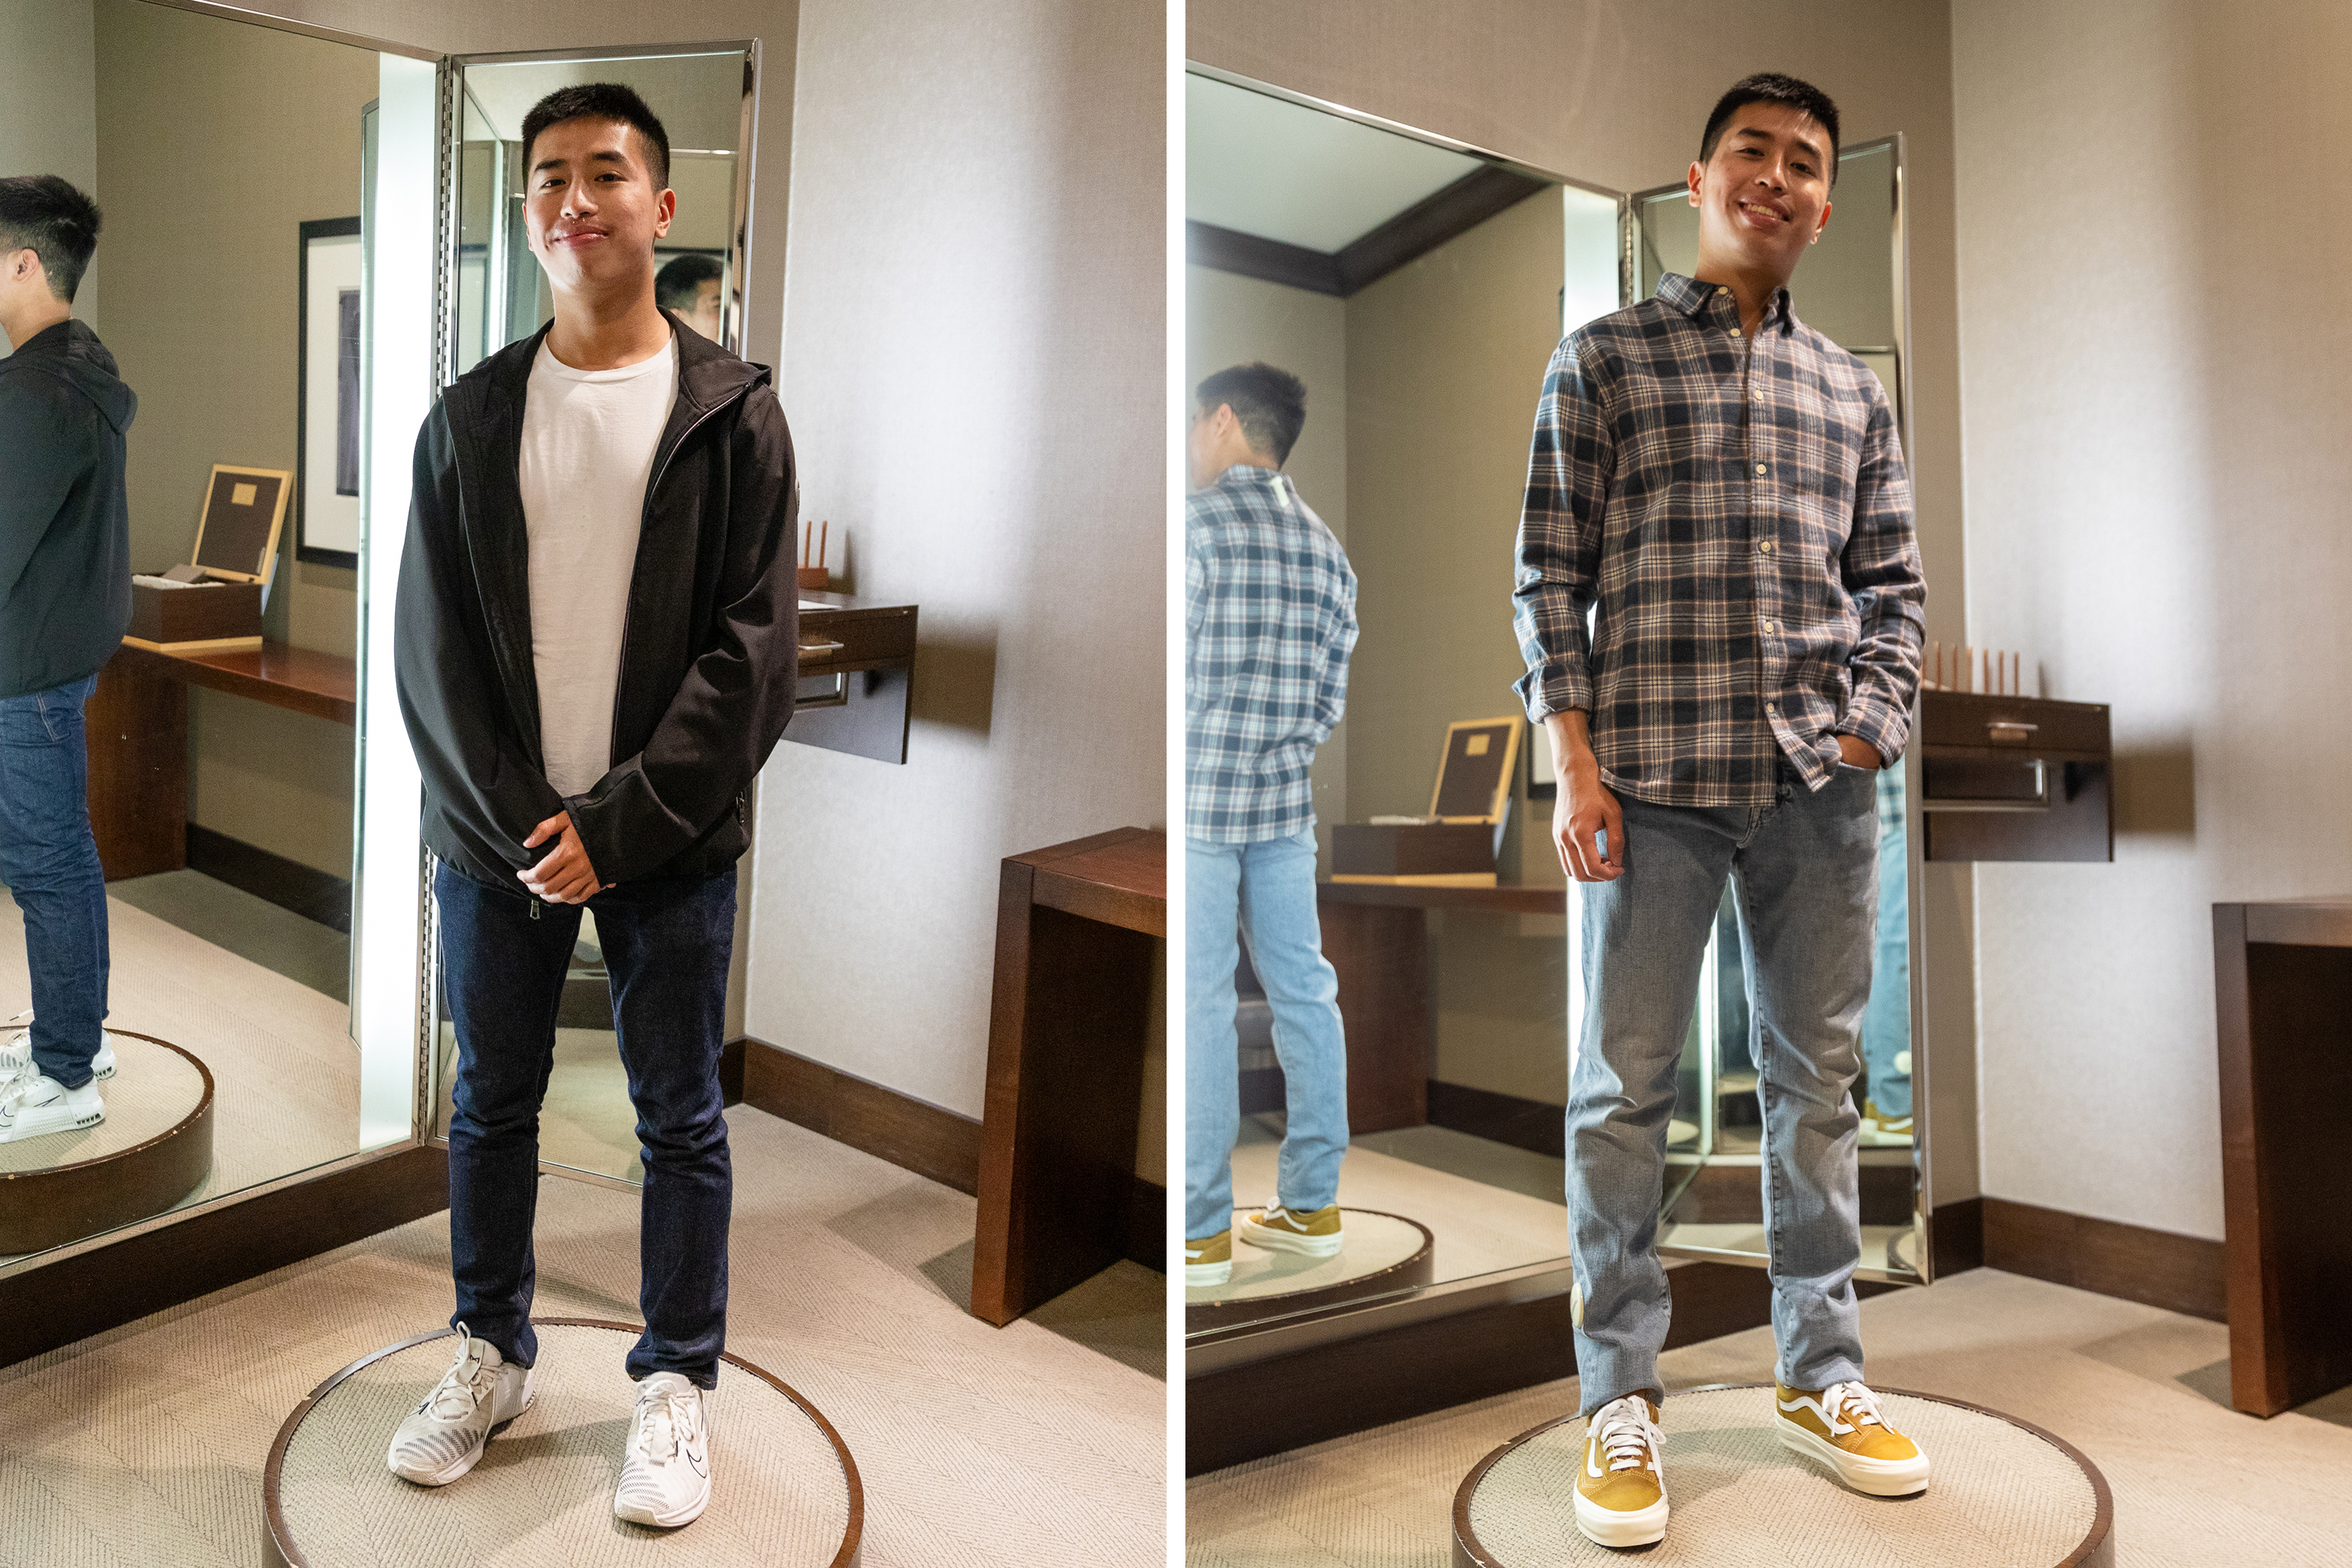 The image shows a young man trying on two different outfits in front of a mirror. One side features him in a black jacket, white T-shirt, jeans, and white sneakers, while the other shows him in a plaid shirt, jeans, and mustard-colored sneakers.